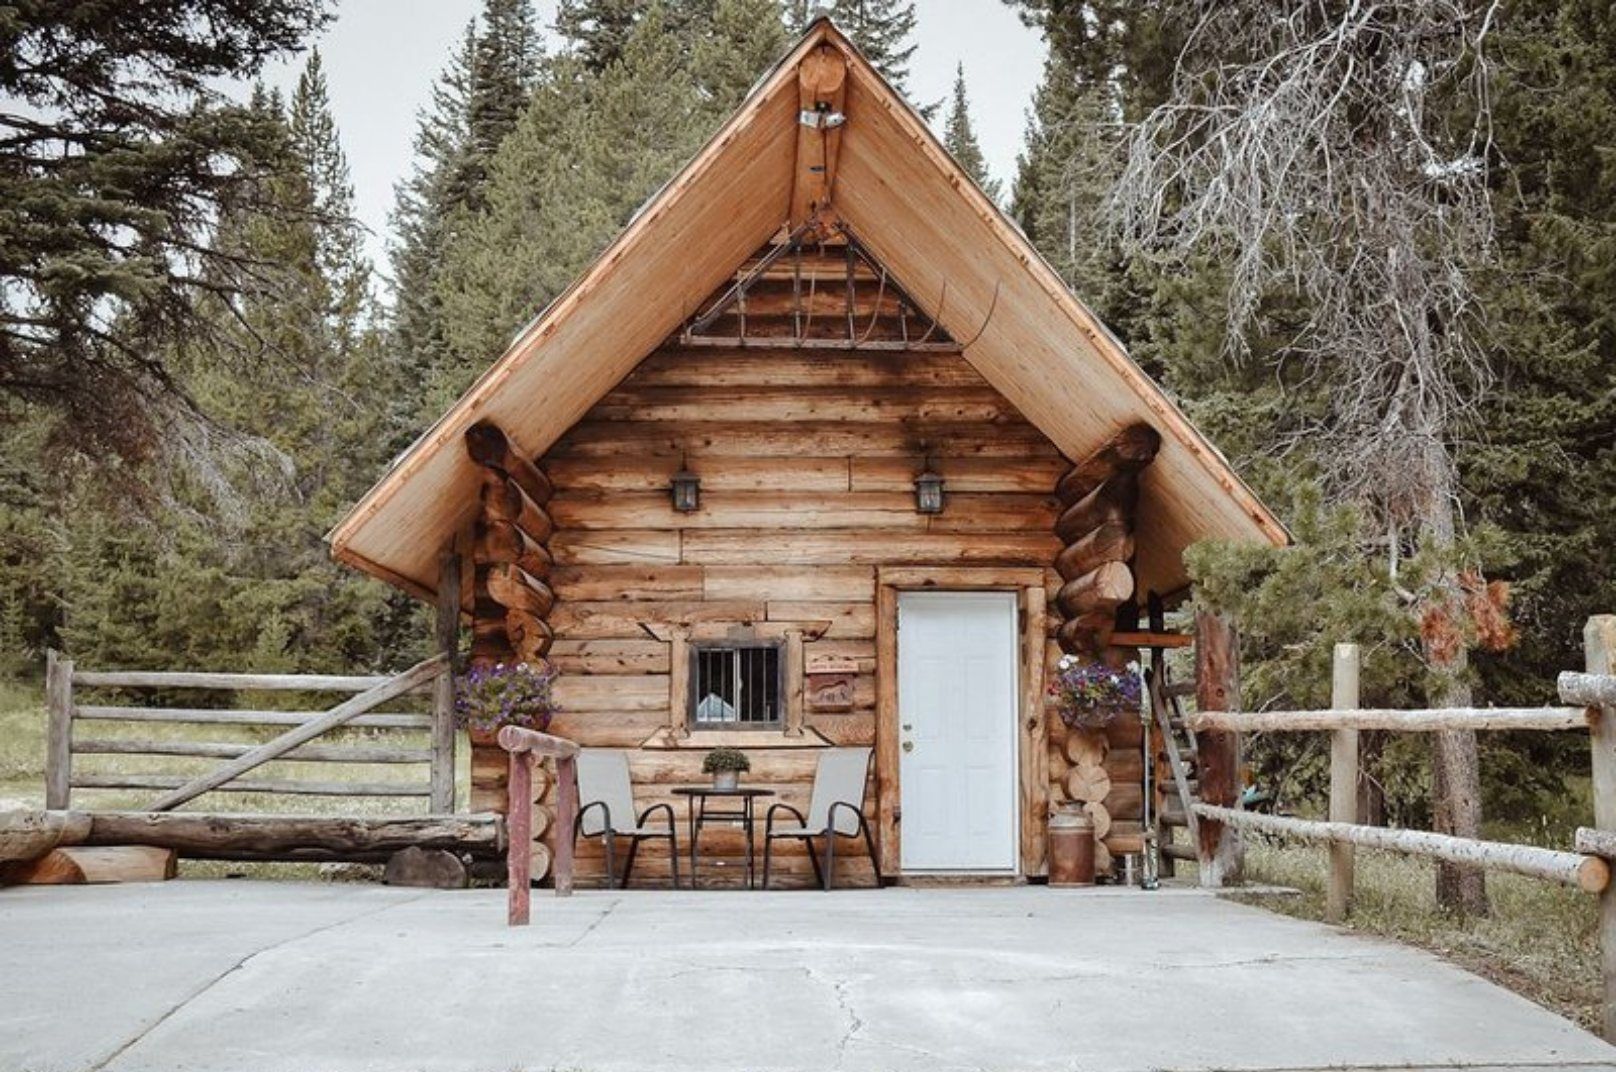 The Best Airbnbs Near Yellowstone National Park